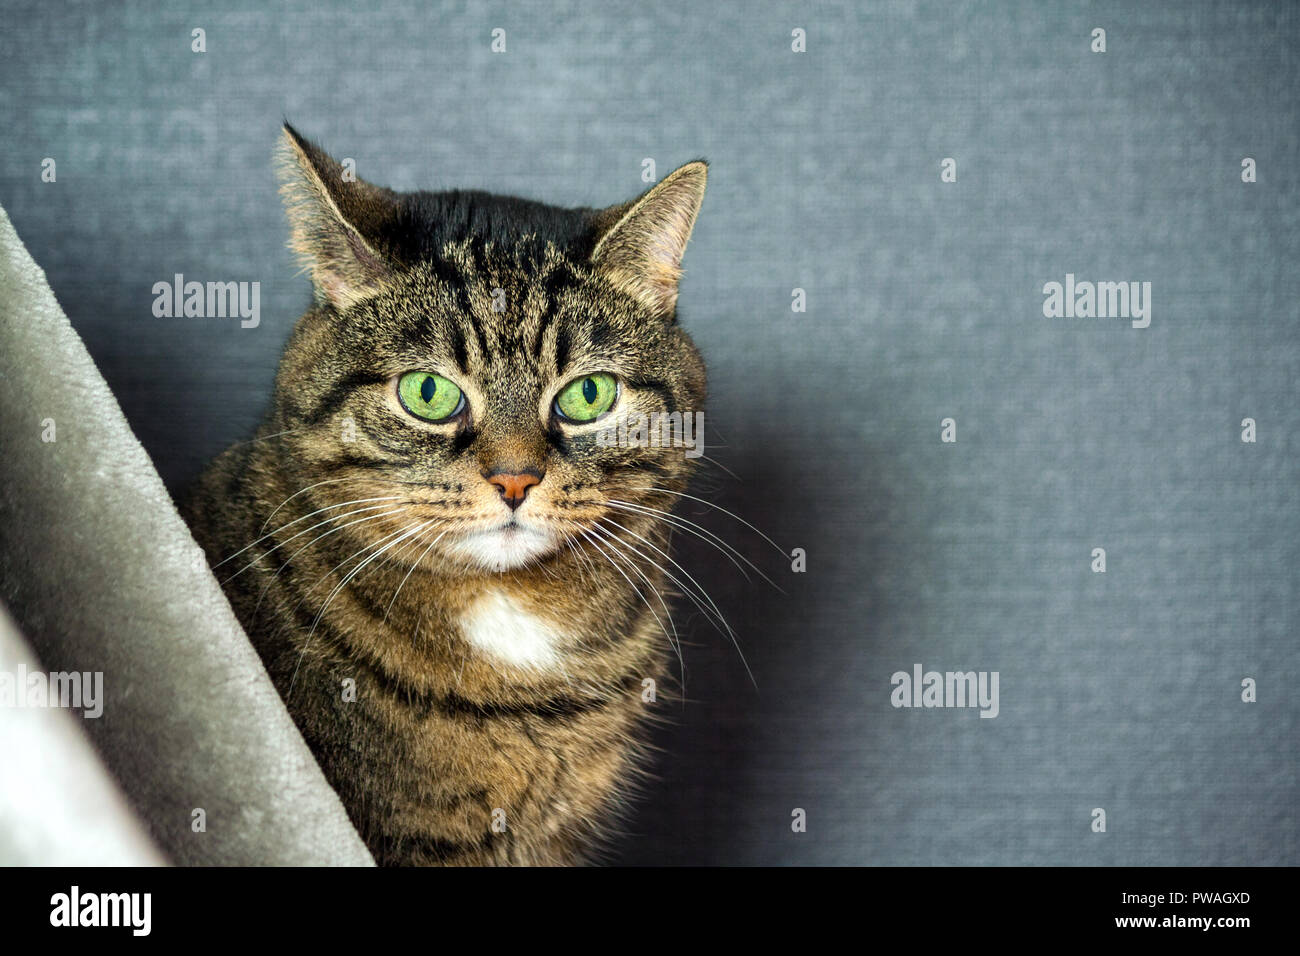 mongrel striped cat, fat cheeks, close-up portrait, sits behind a gray veil, in the background a dark blue background, huge green slanting eyes, Stock Photo